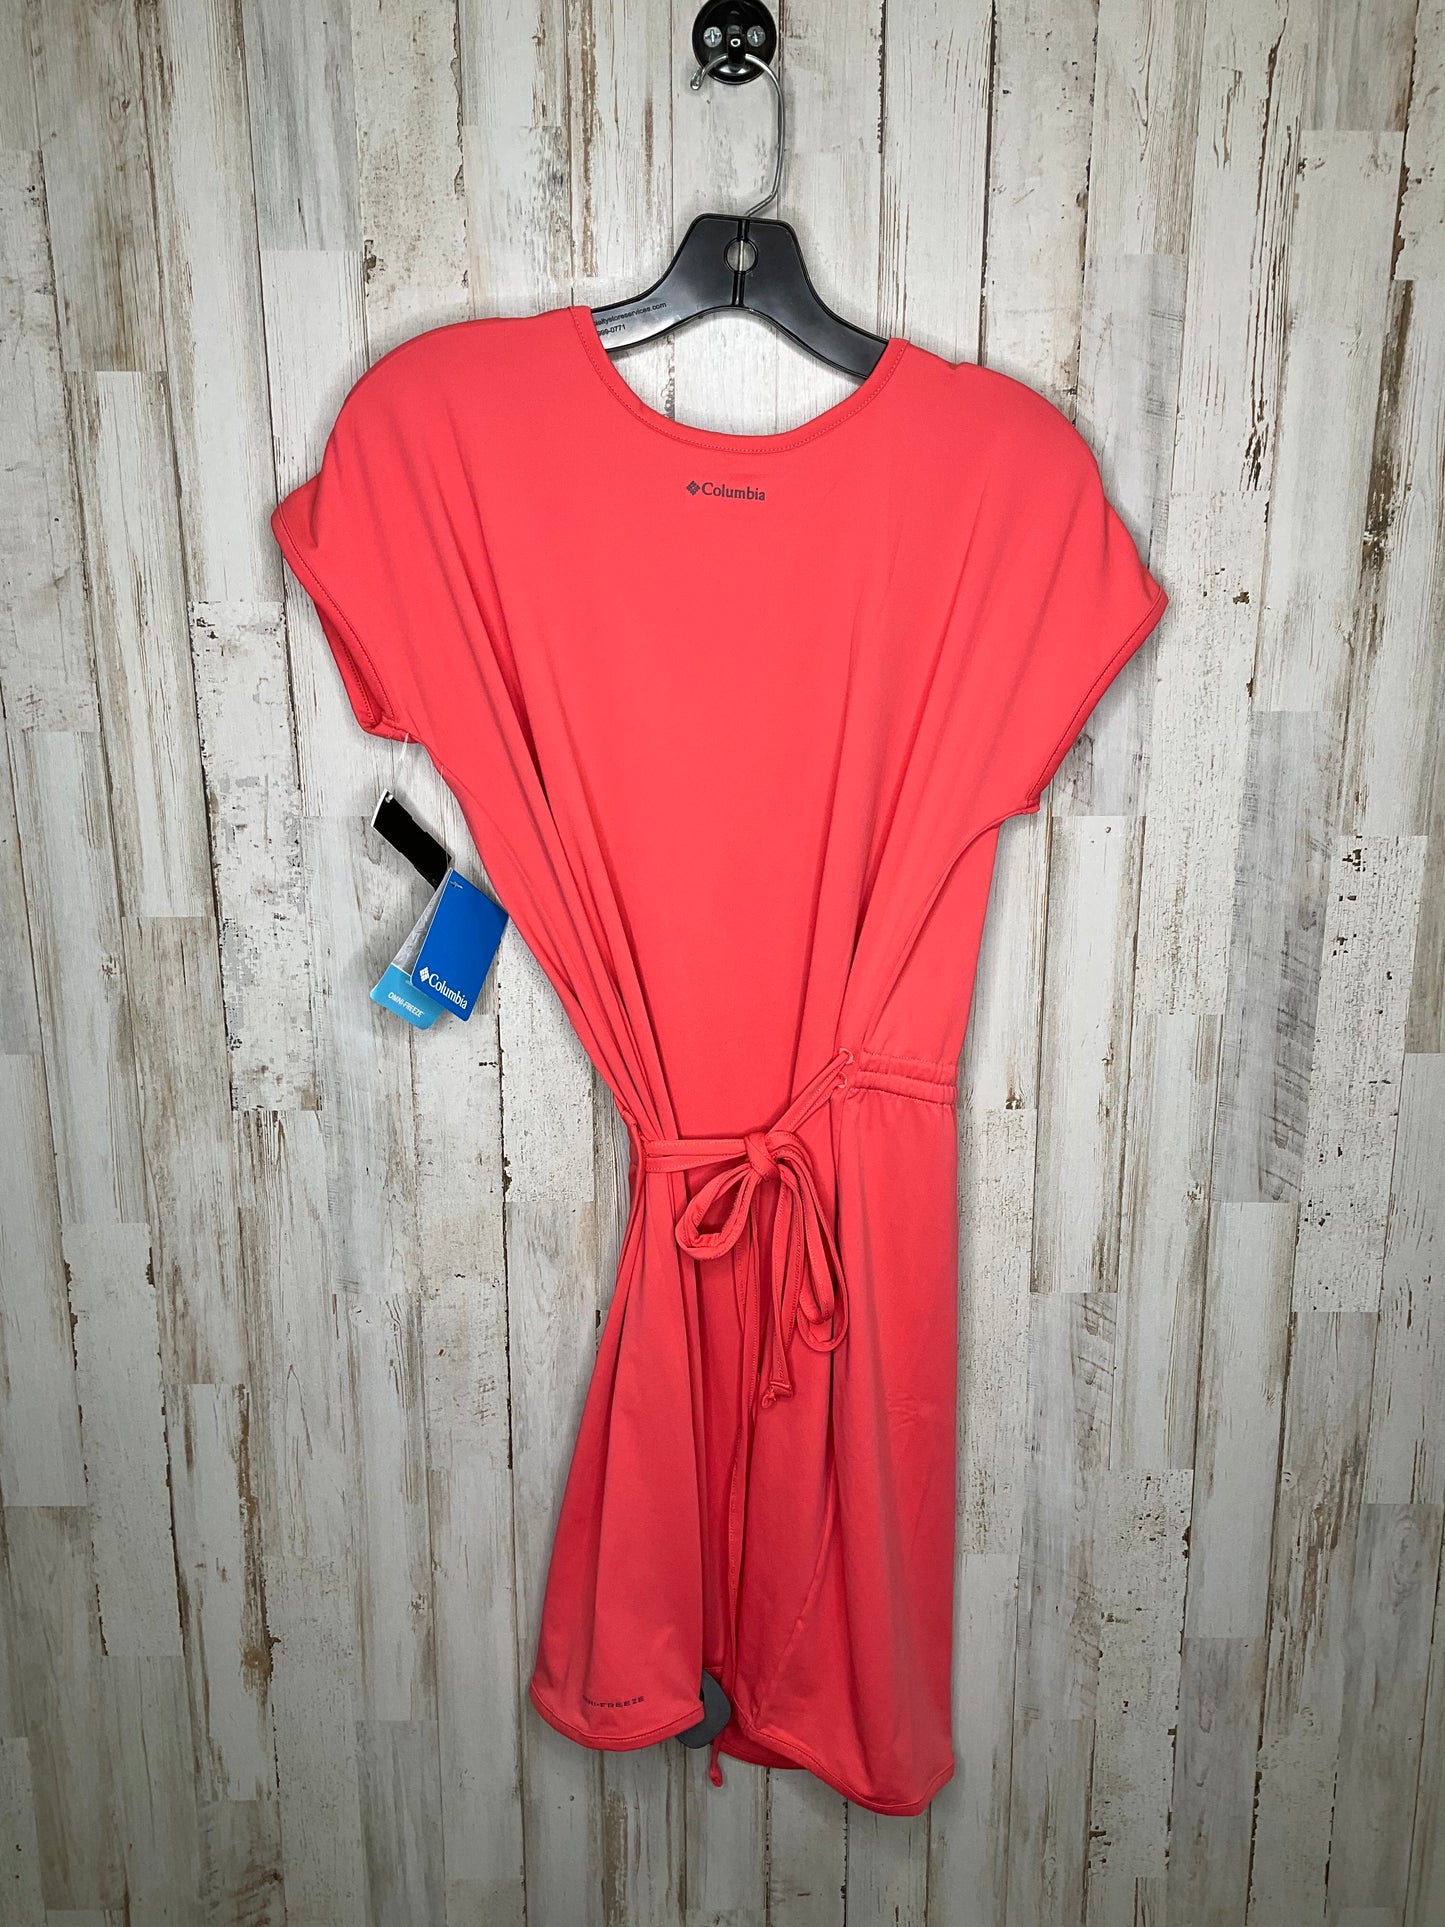 Peach Athletic Dress Columbia, Size S